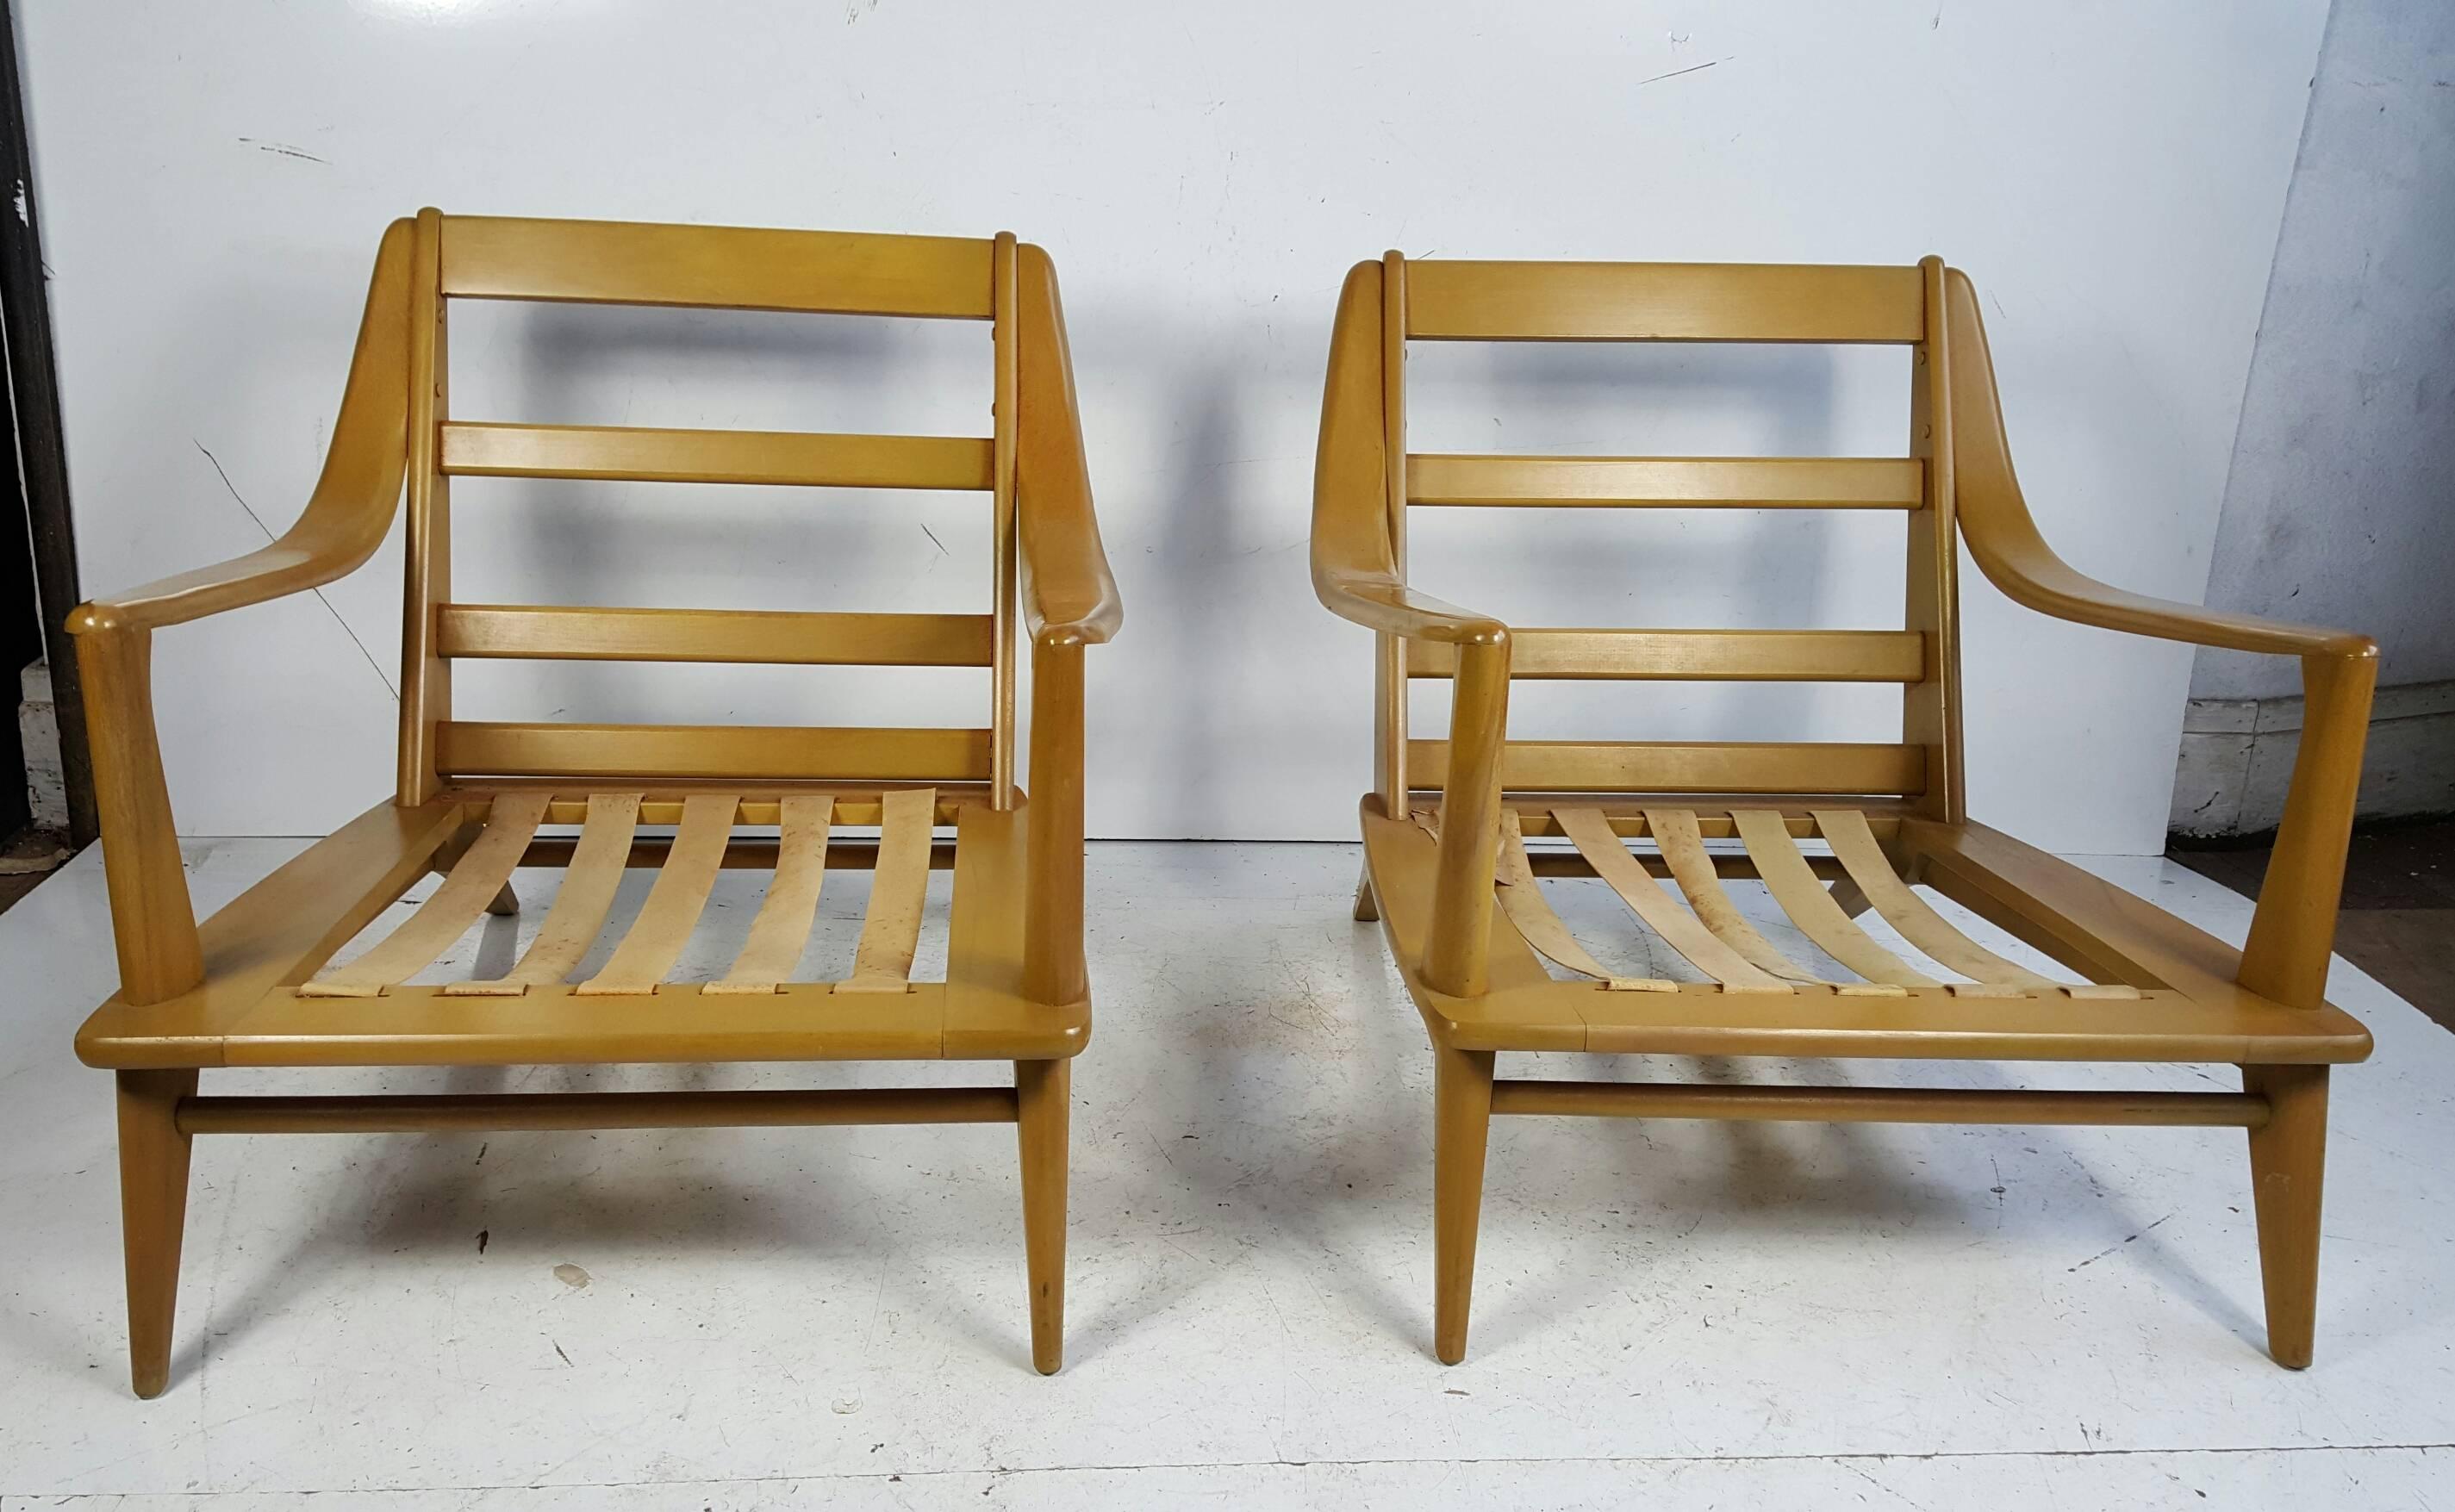 Classic Mid-Century Modern streamline lounge chairs manufactured by Heywood-Wakefield. Solid birch wood construction. Wheat finish.